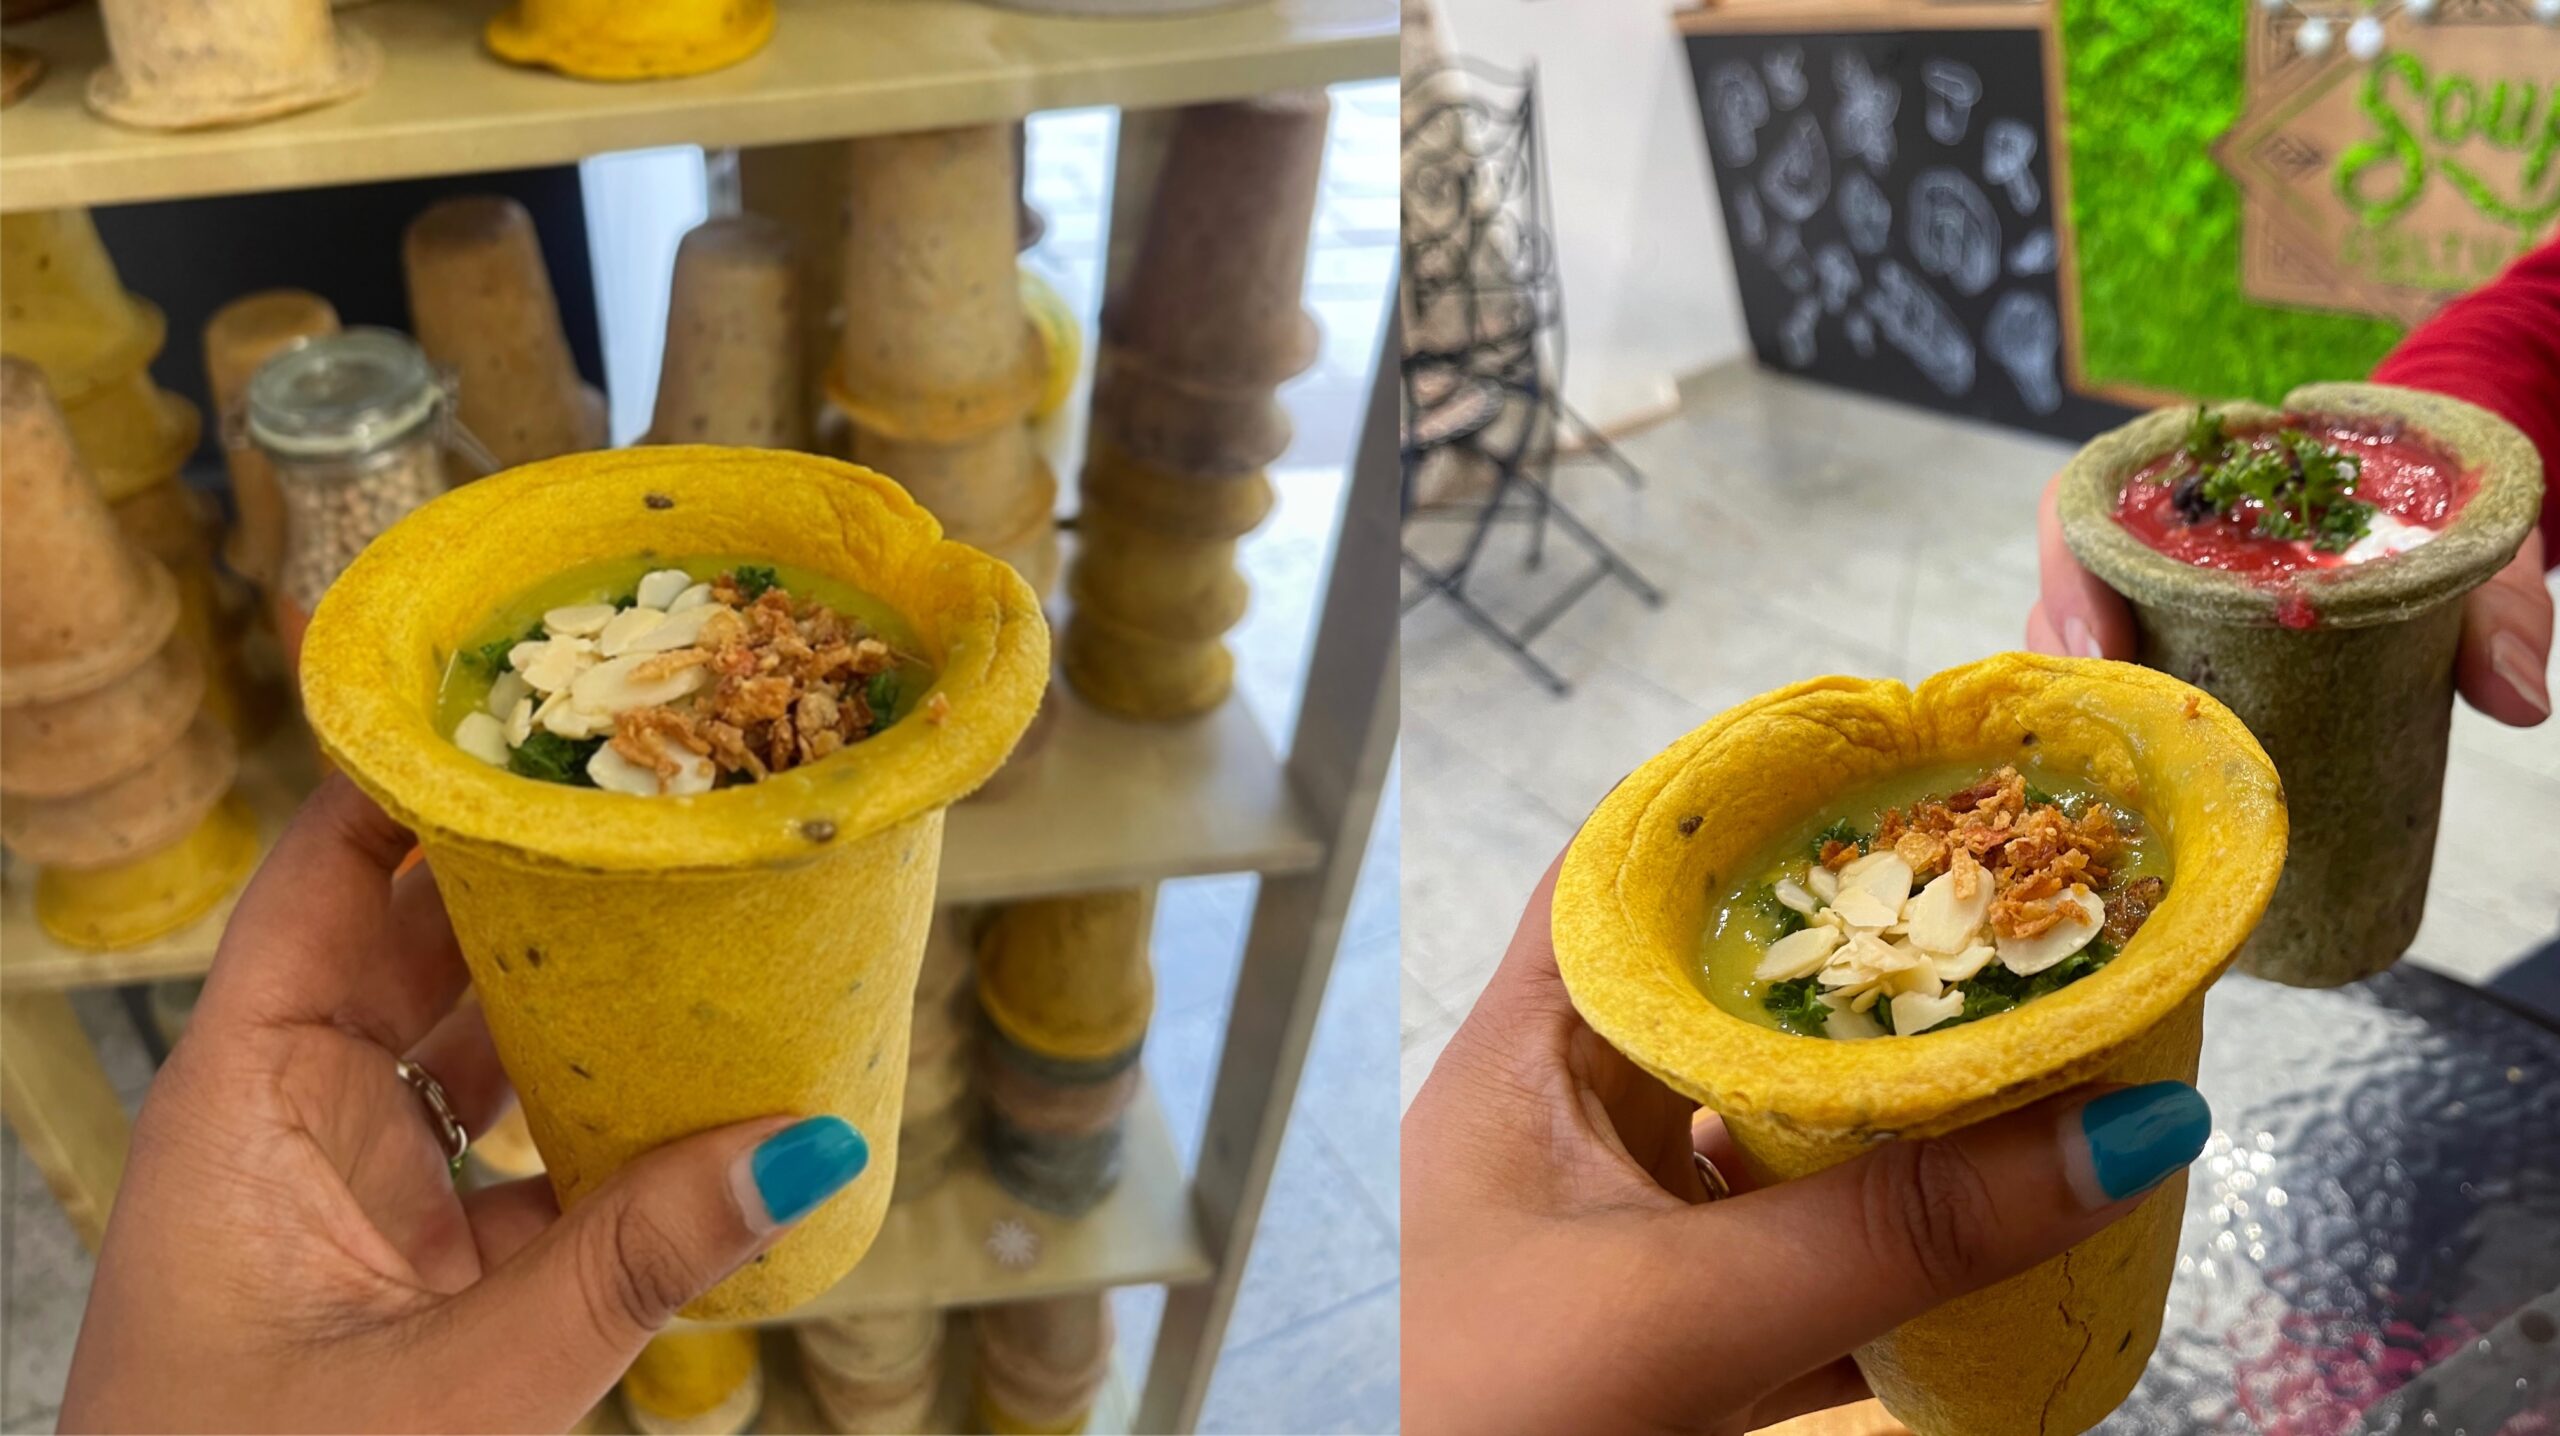 Hand holding soup inside an edible bread cup